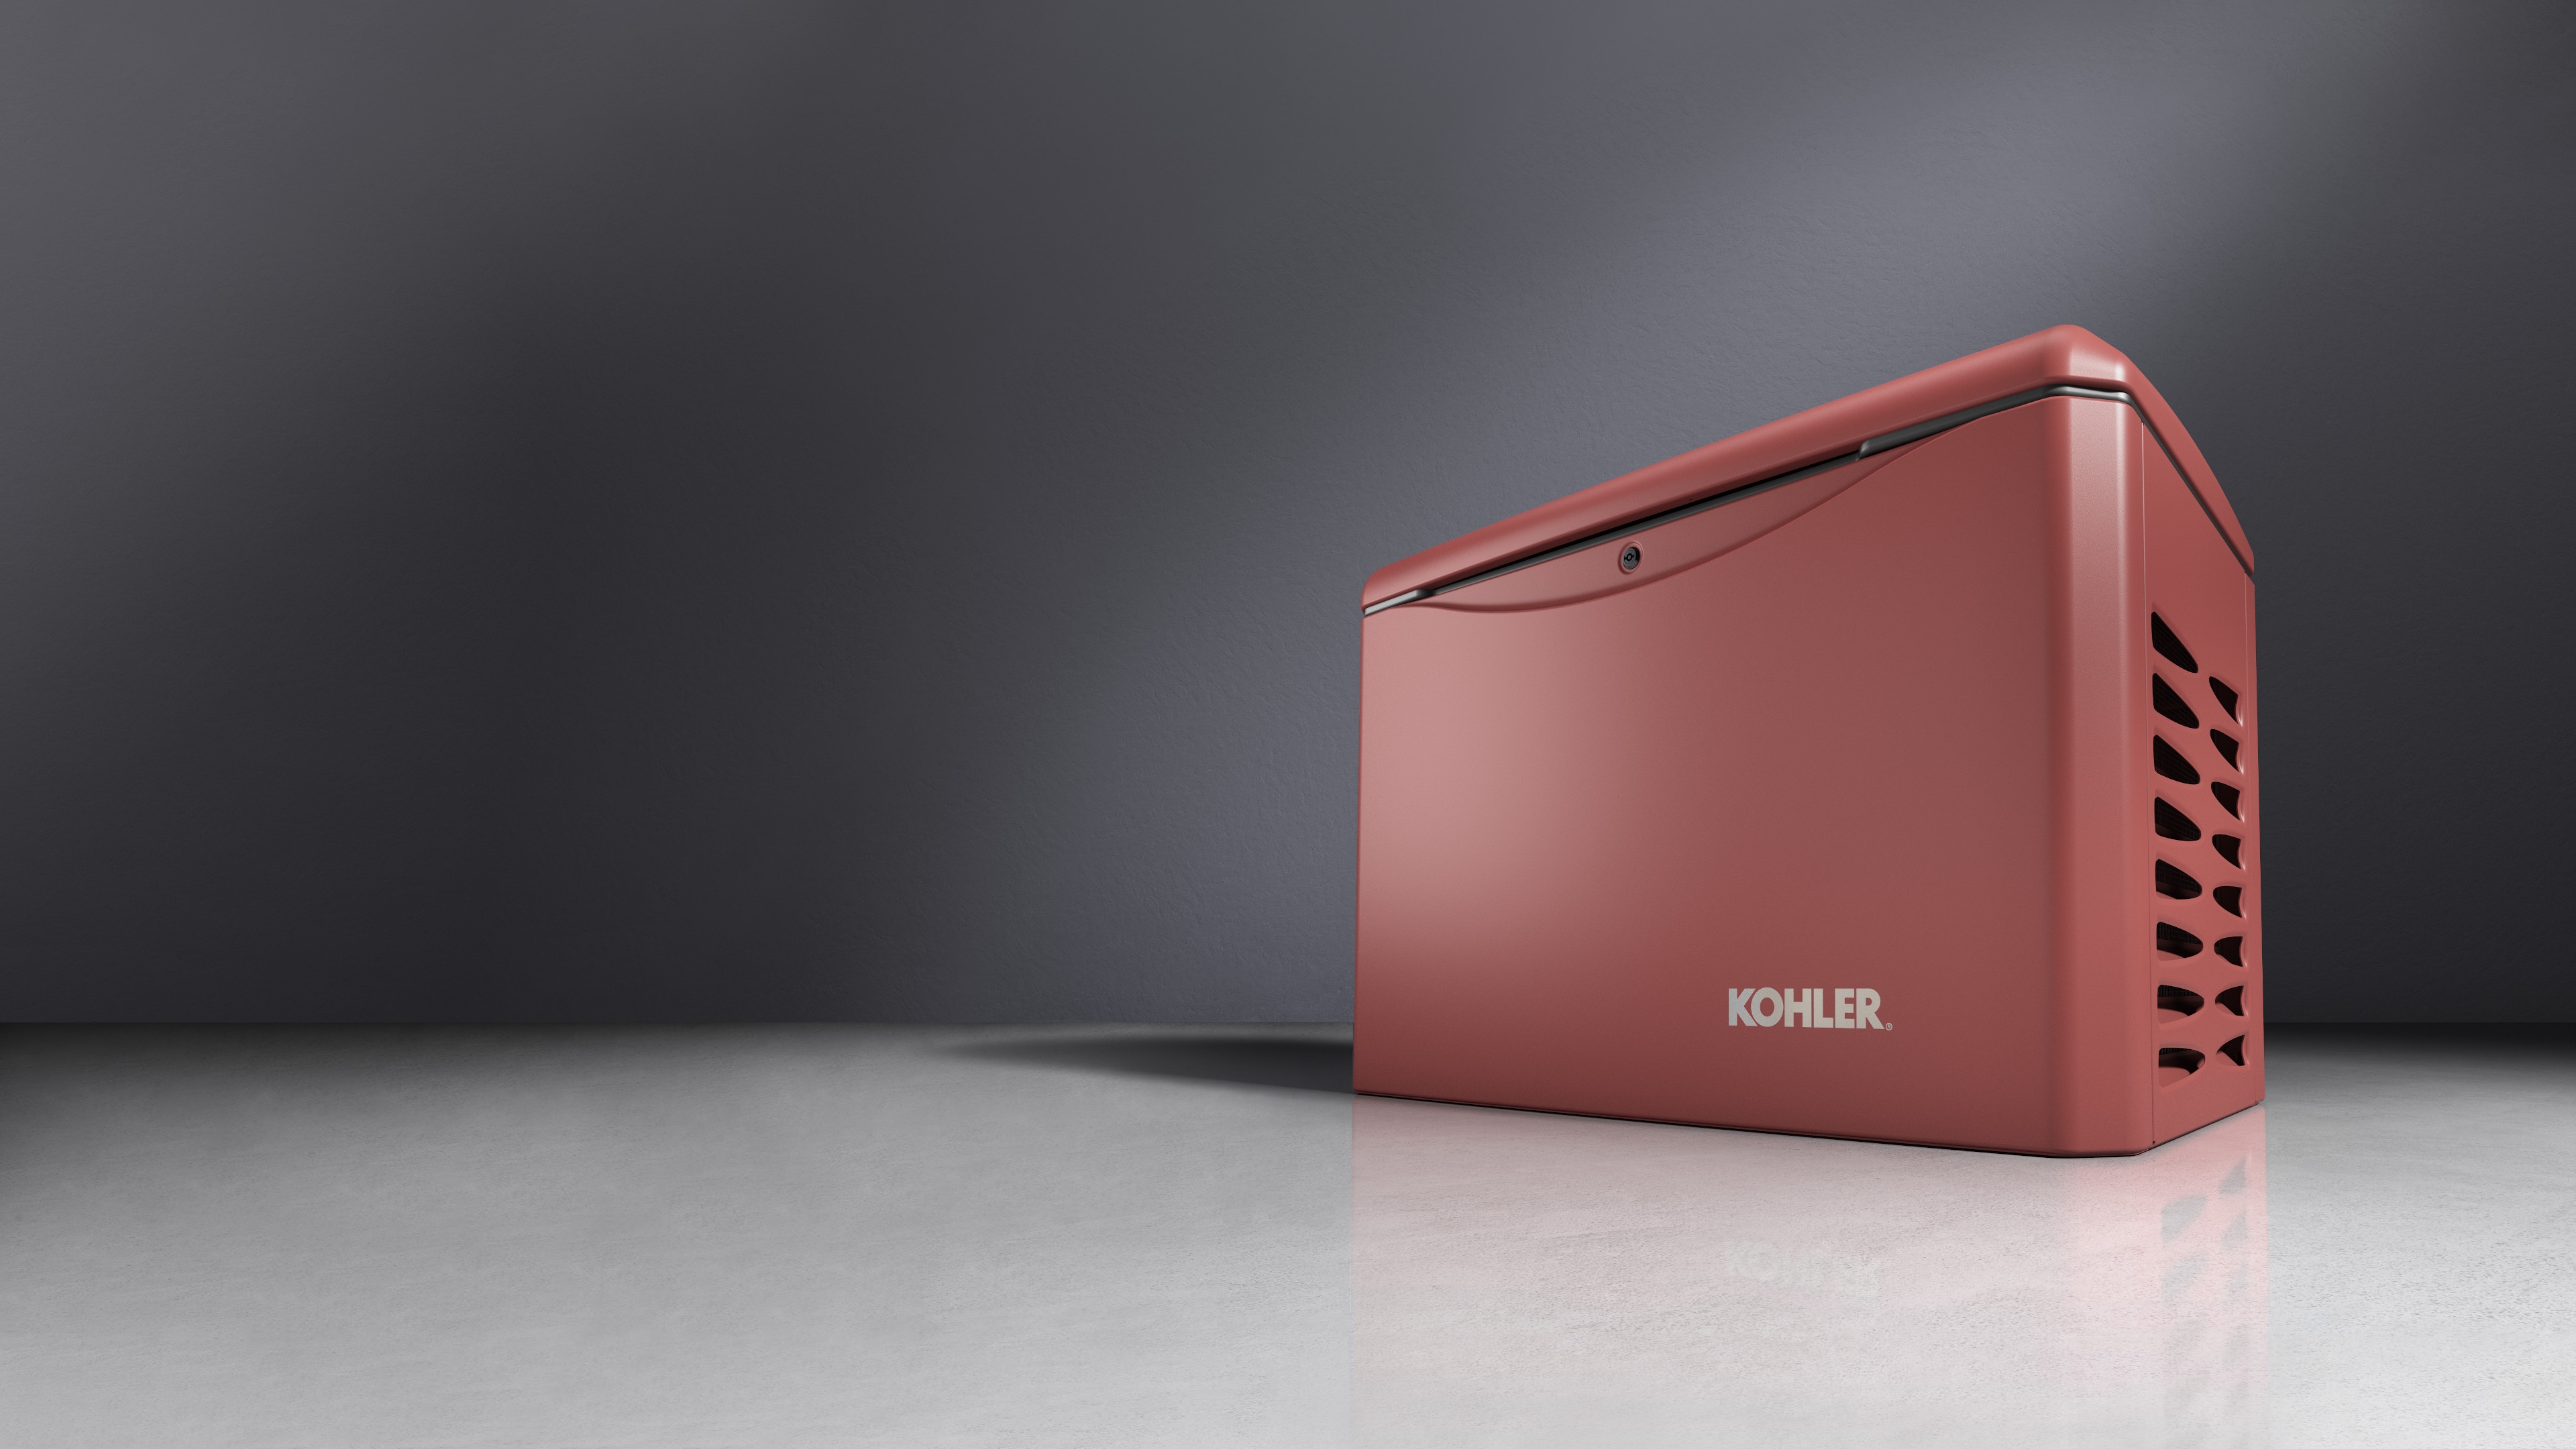 Brick Dust color Kohler residential generator with ventilated side panels, showcased against a gradient gray background.